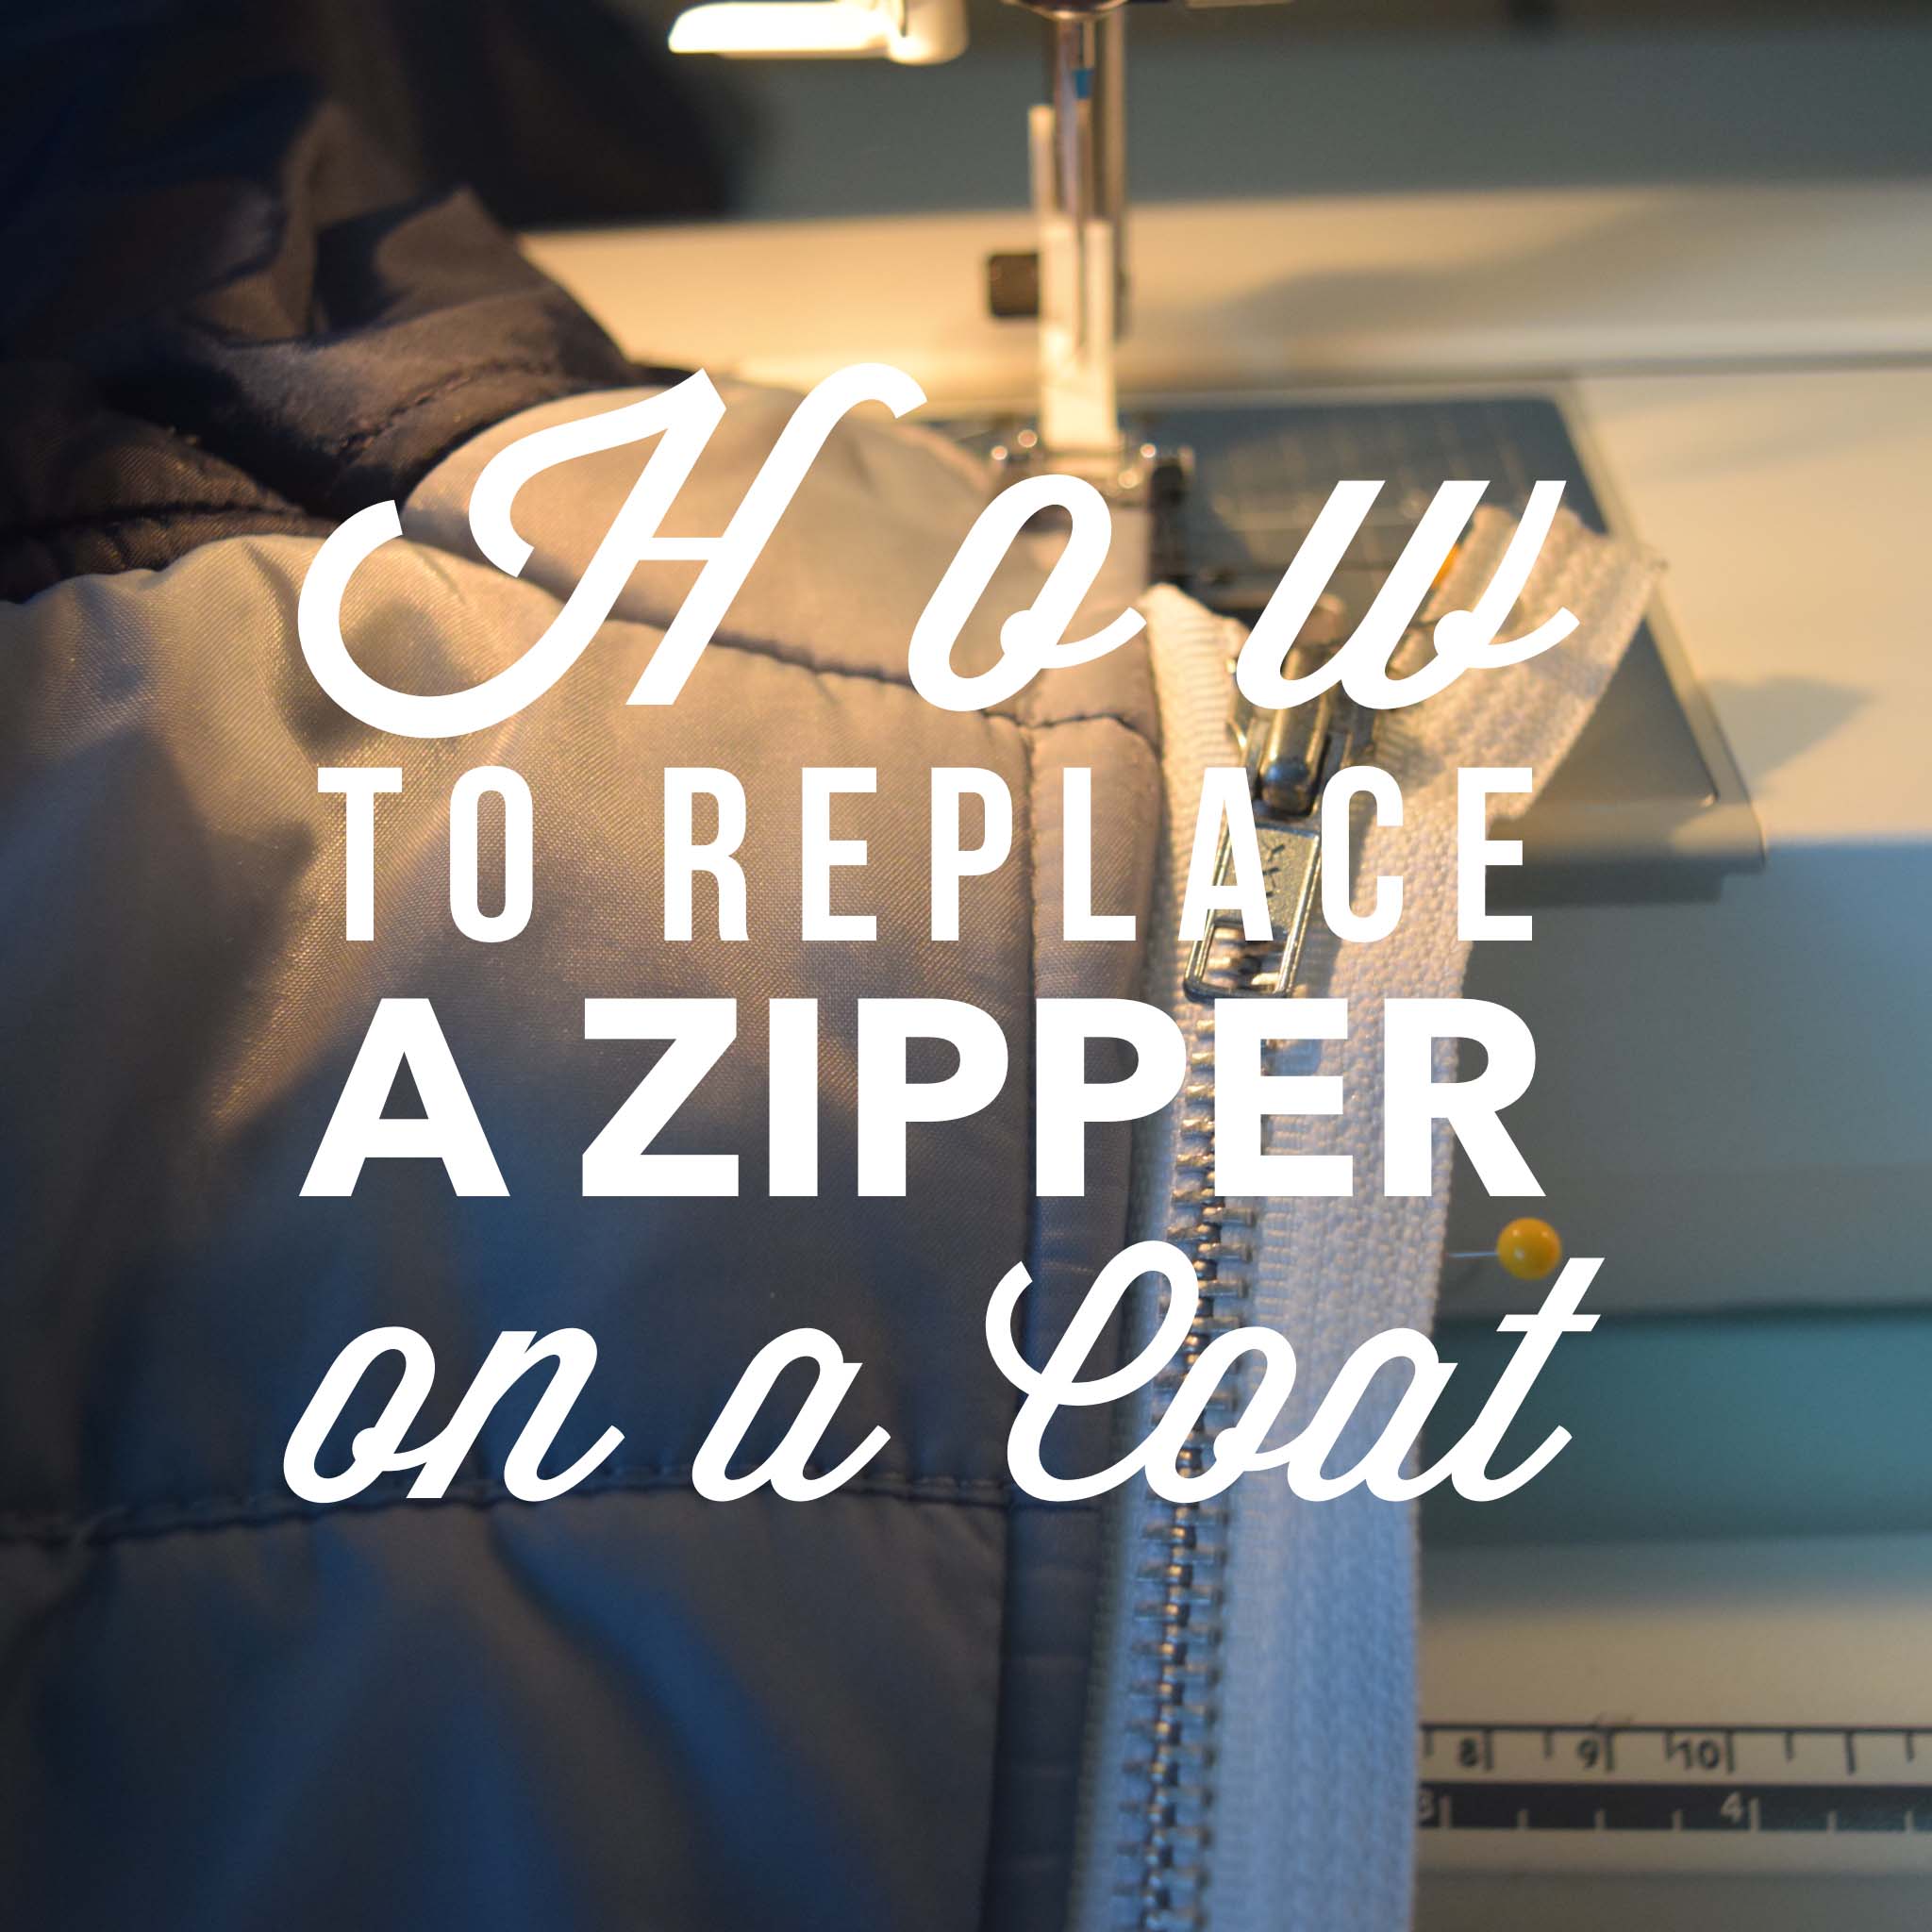 How to Replace a Zipper on a Coat.